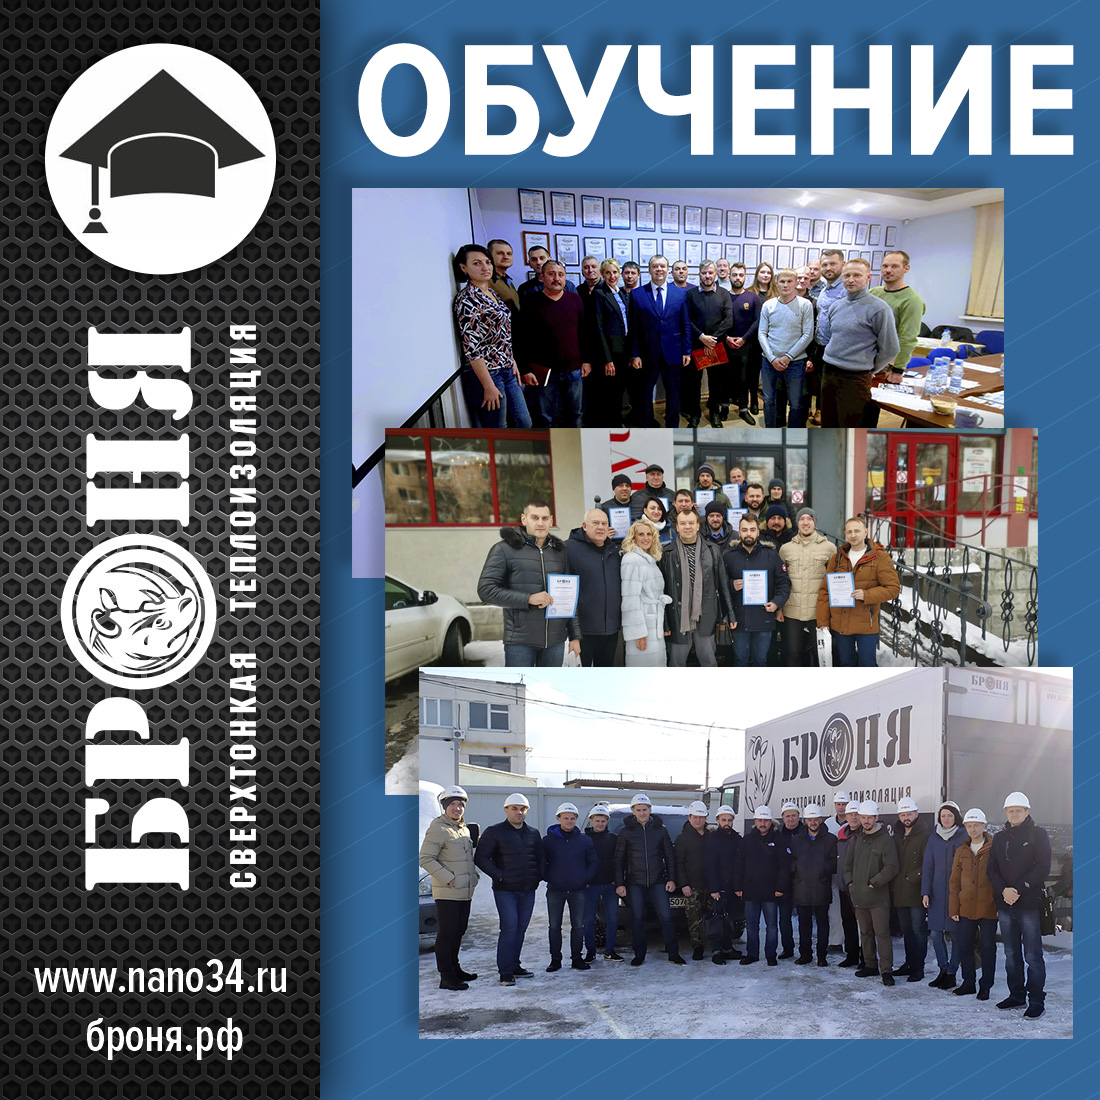 Another training was held for representatives of WIRC Bronya group (photo).